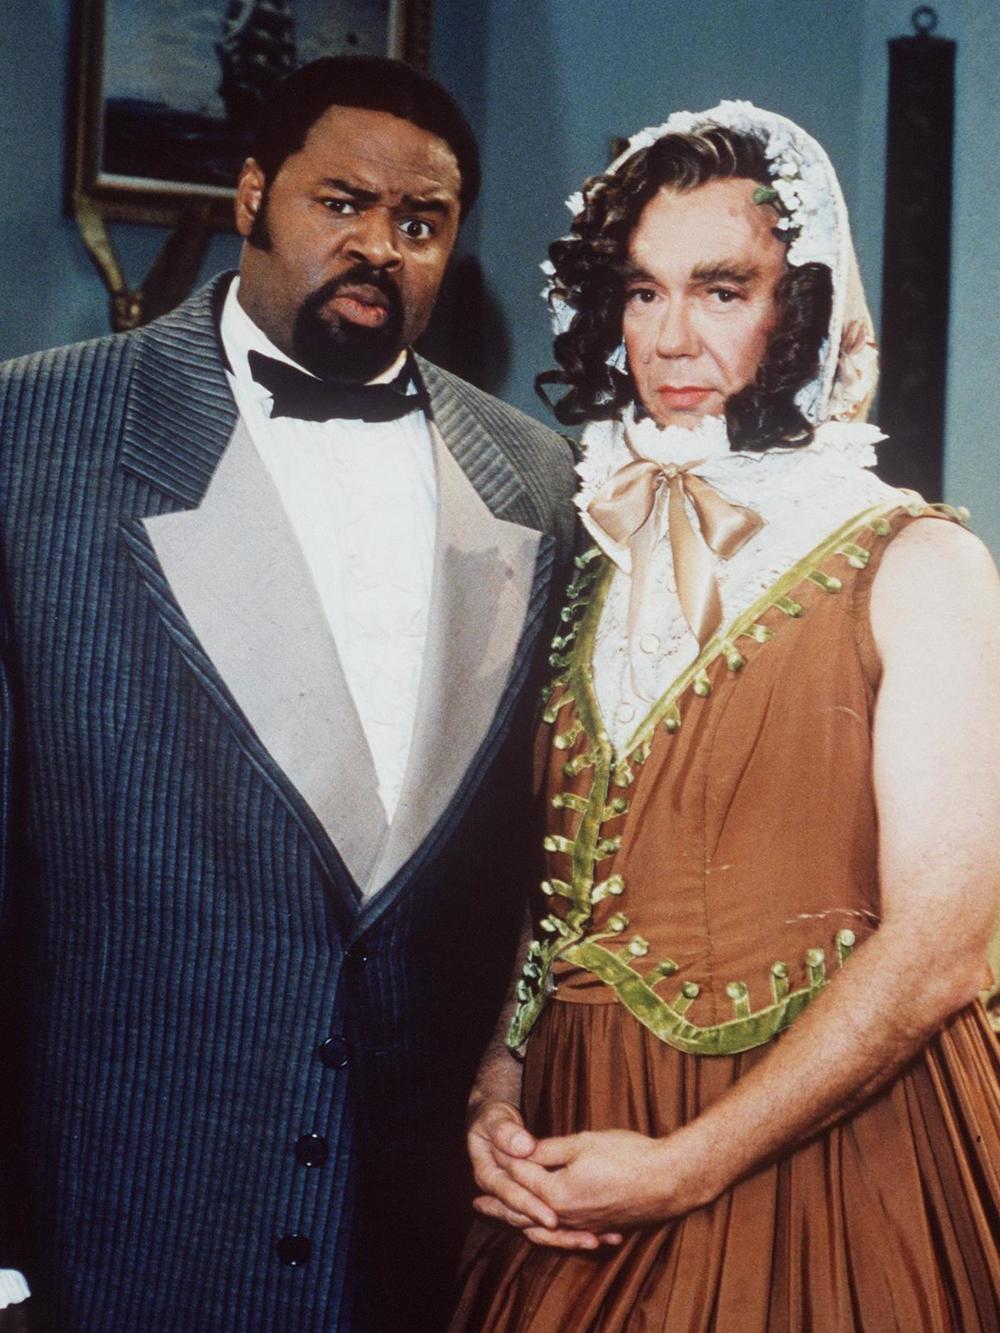 Chi McBride as butler Desmond Pfeiffer and Dann Florek as a disguised Abraham Lincoln in the UPN show The Secret Diary of Desmond Pfeiffer.